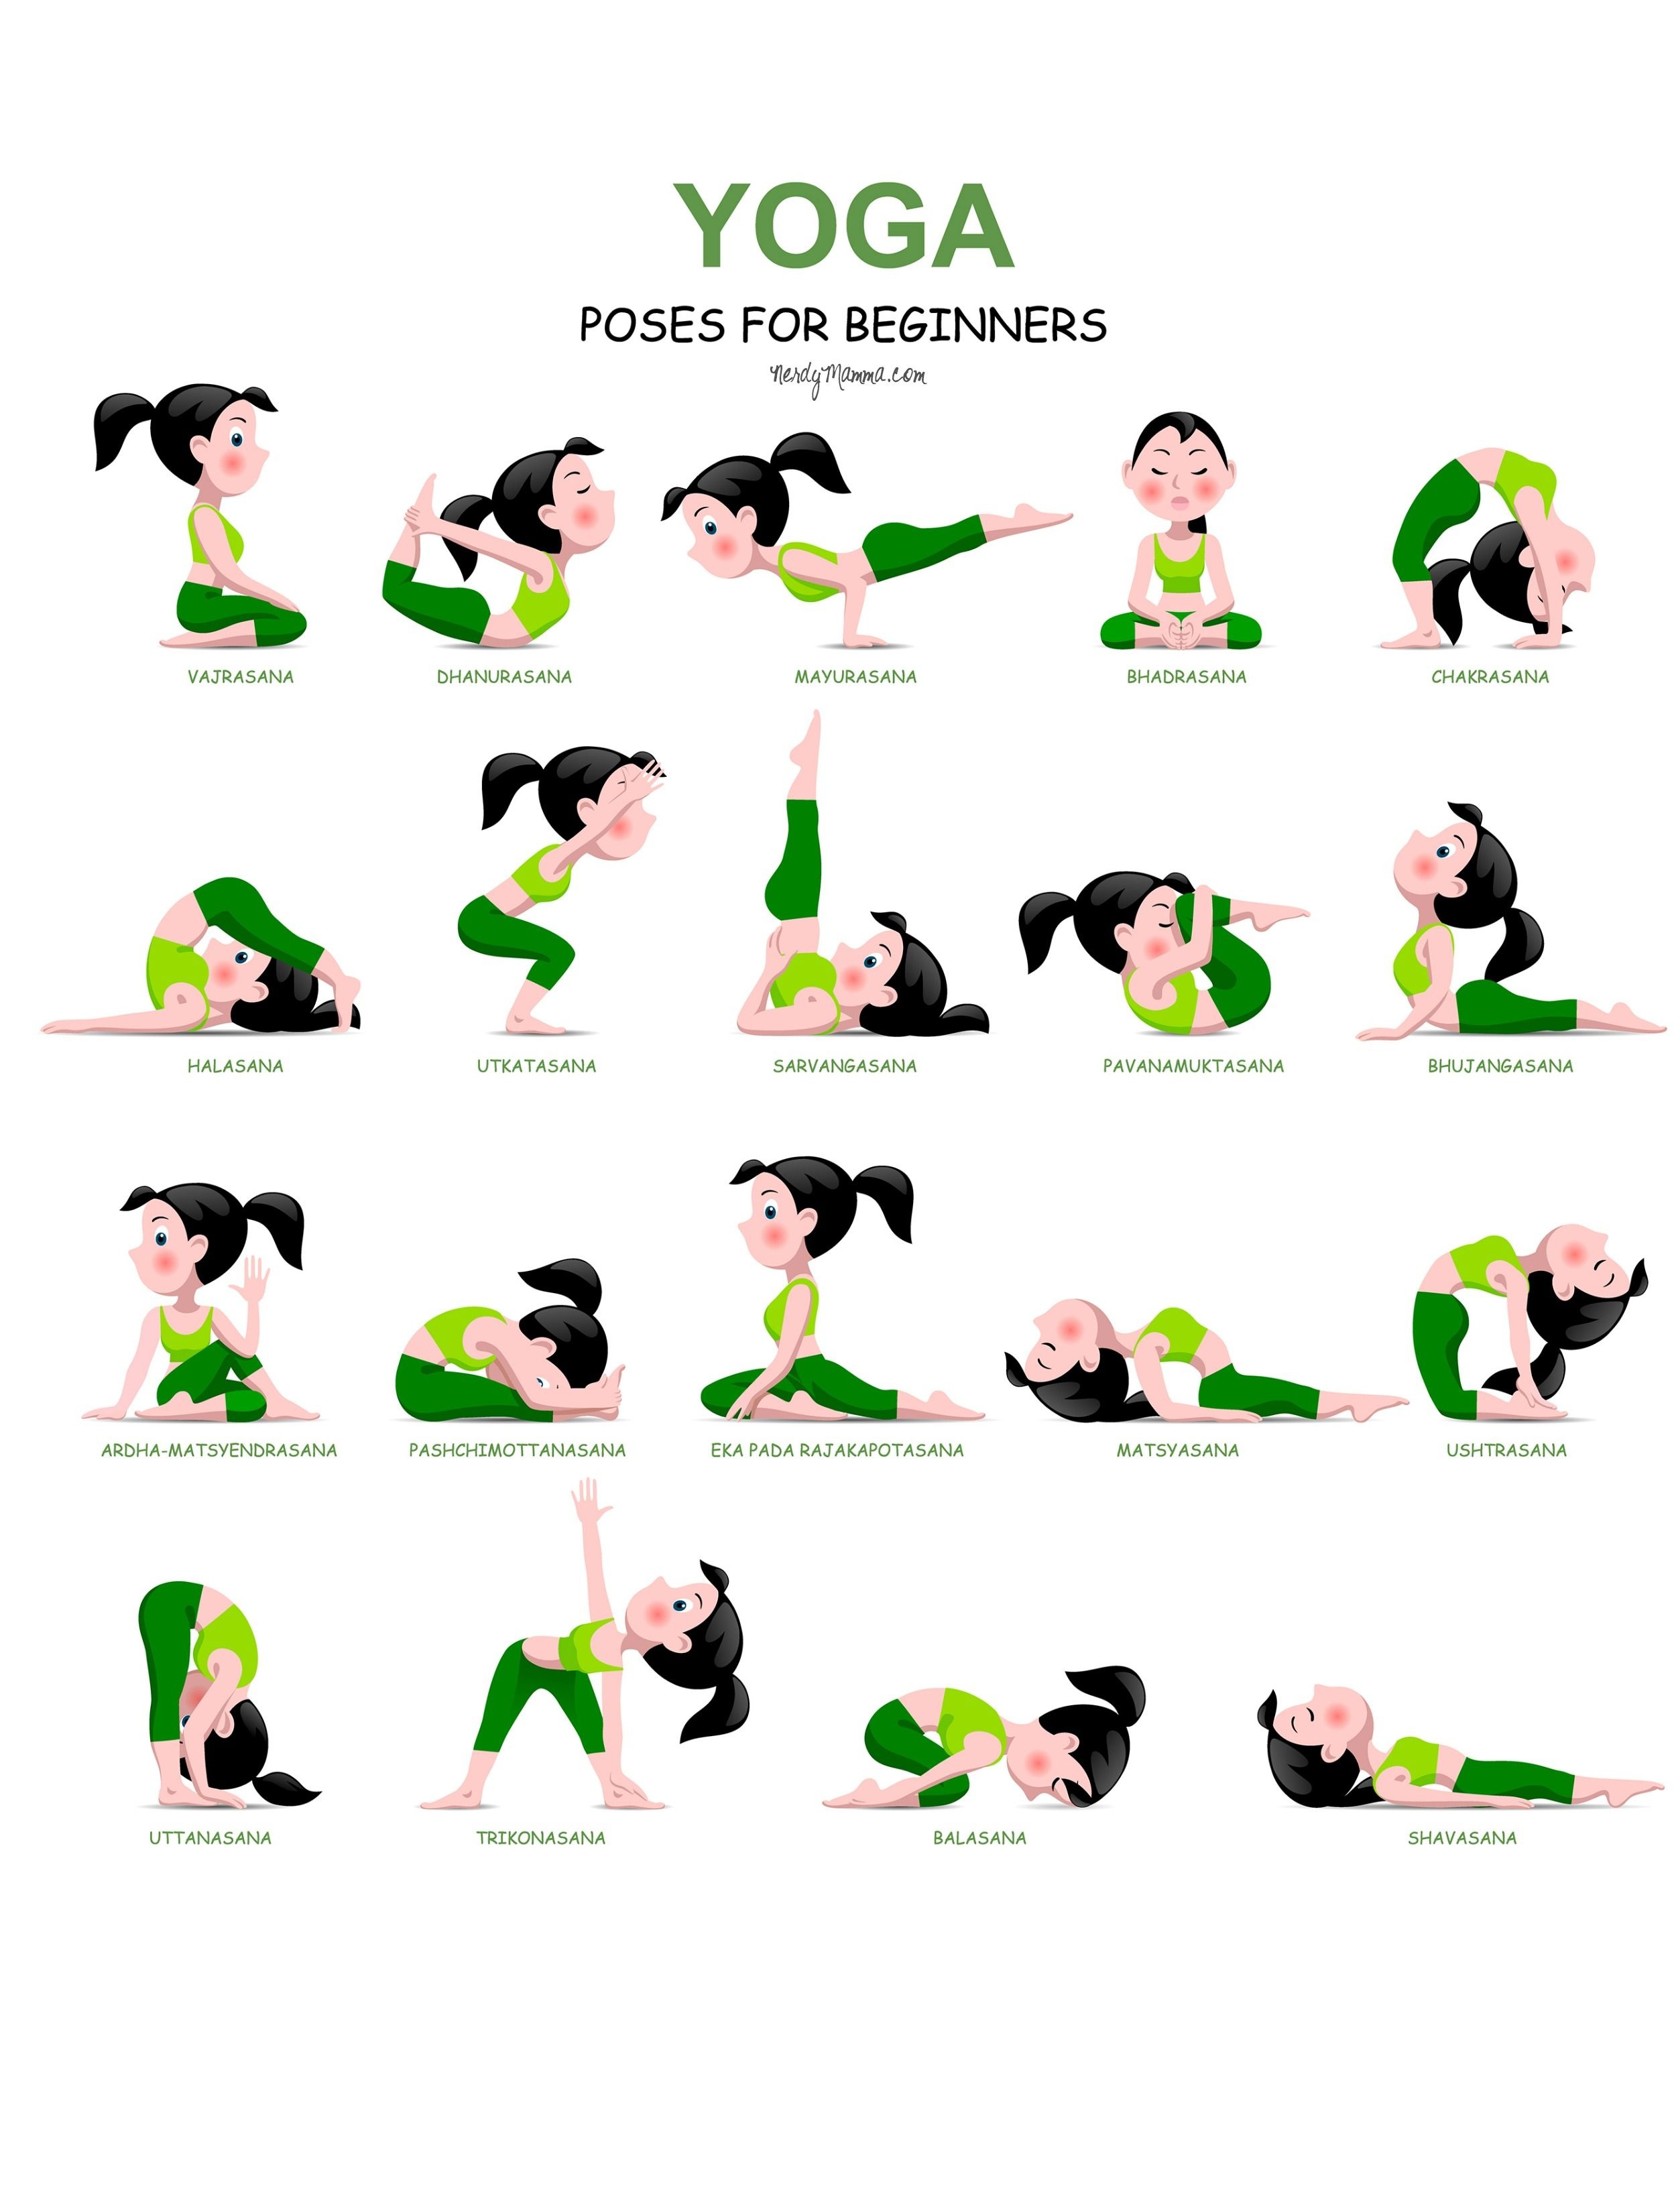 20 Easy Yoga Poses For Beginners With A Free Printable … | Yoga And - Free Printable Yoga Poses